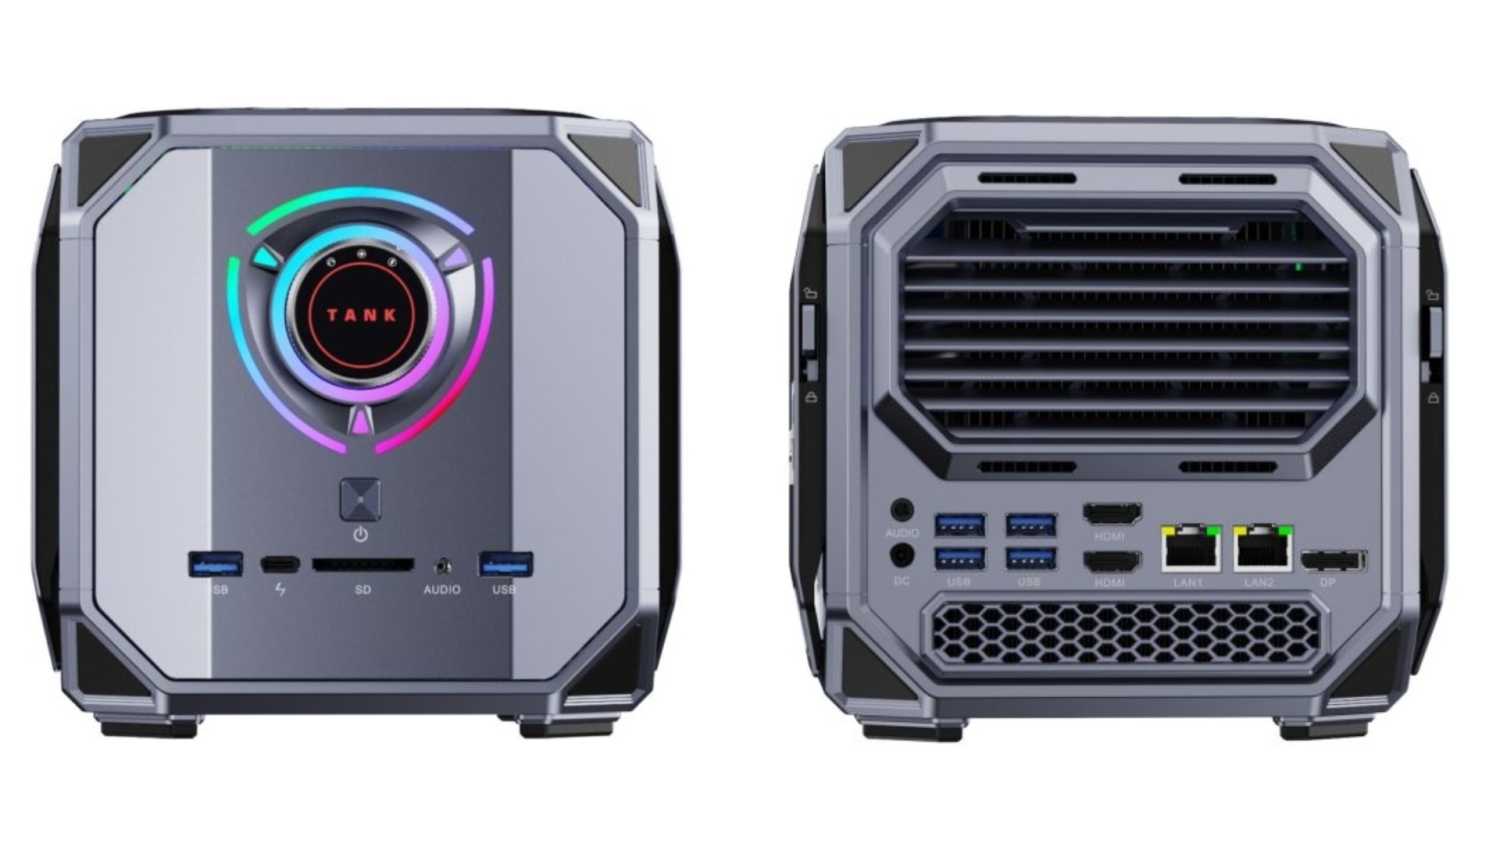 AceMagic Tank 03 is a mini PC with GeForce RTX 3080 mobile graphics and a  funky boombox design